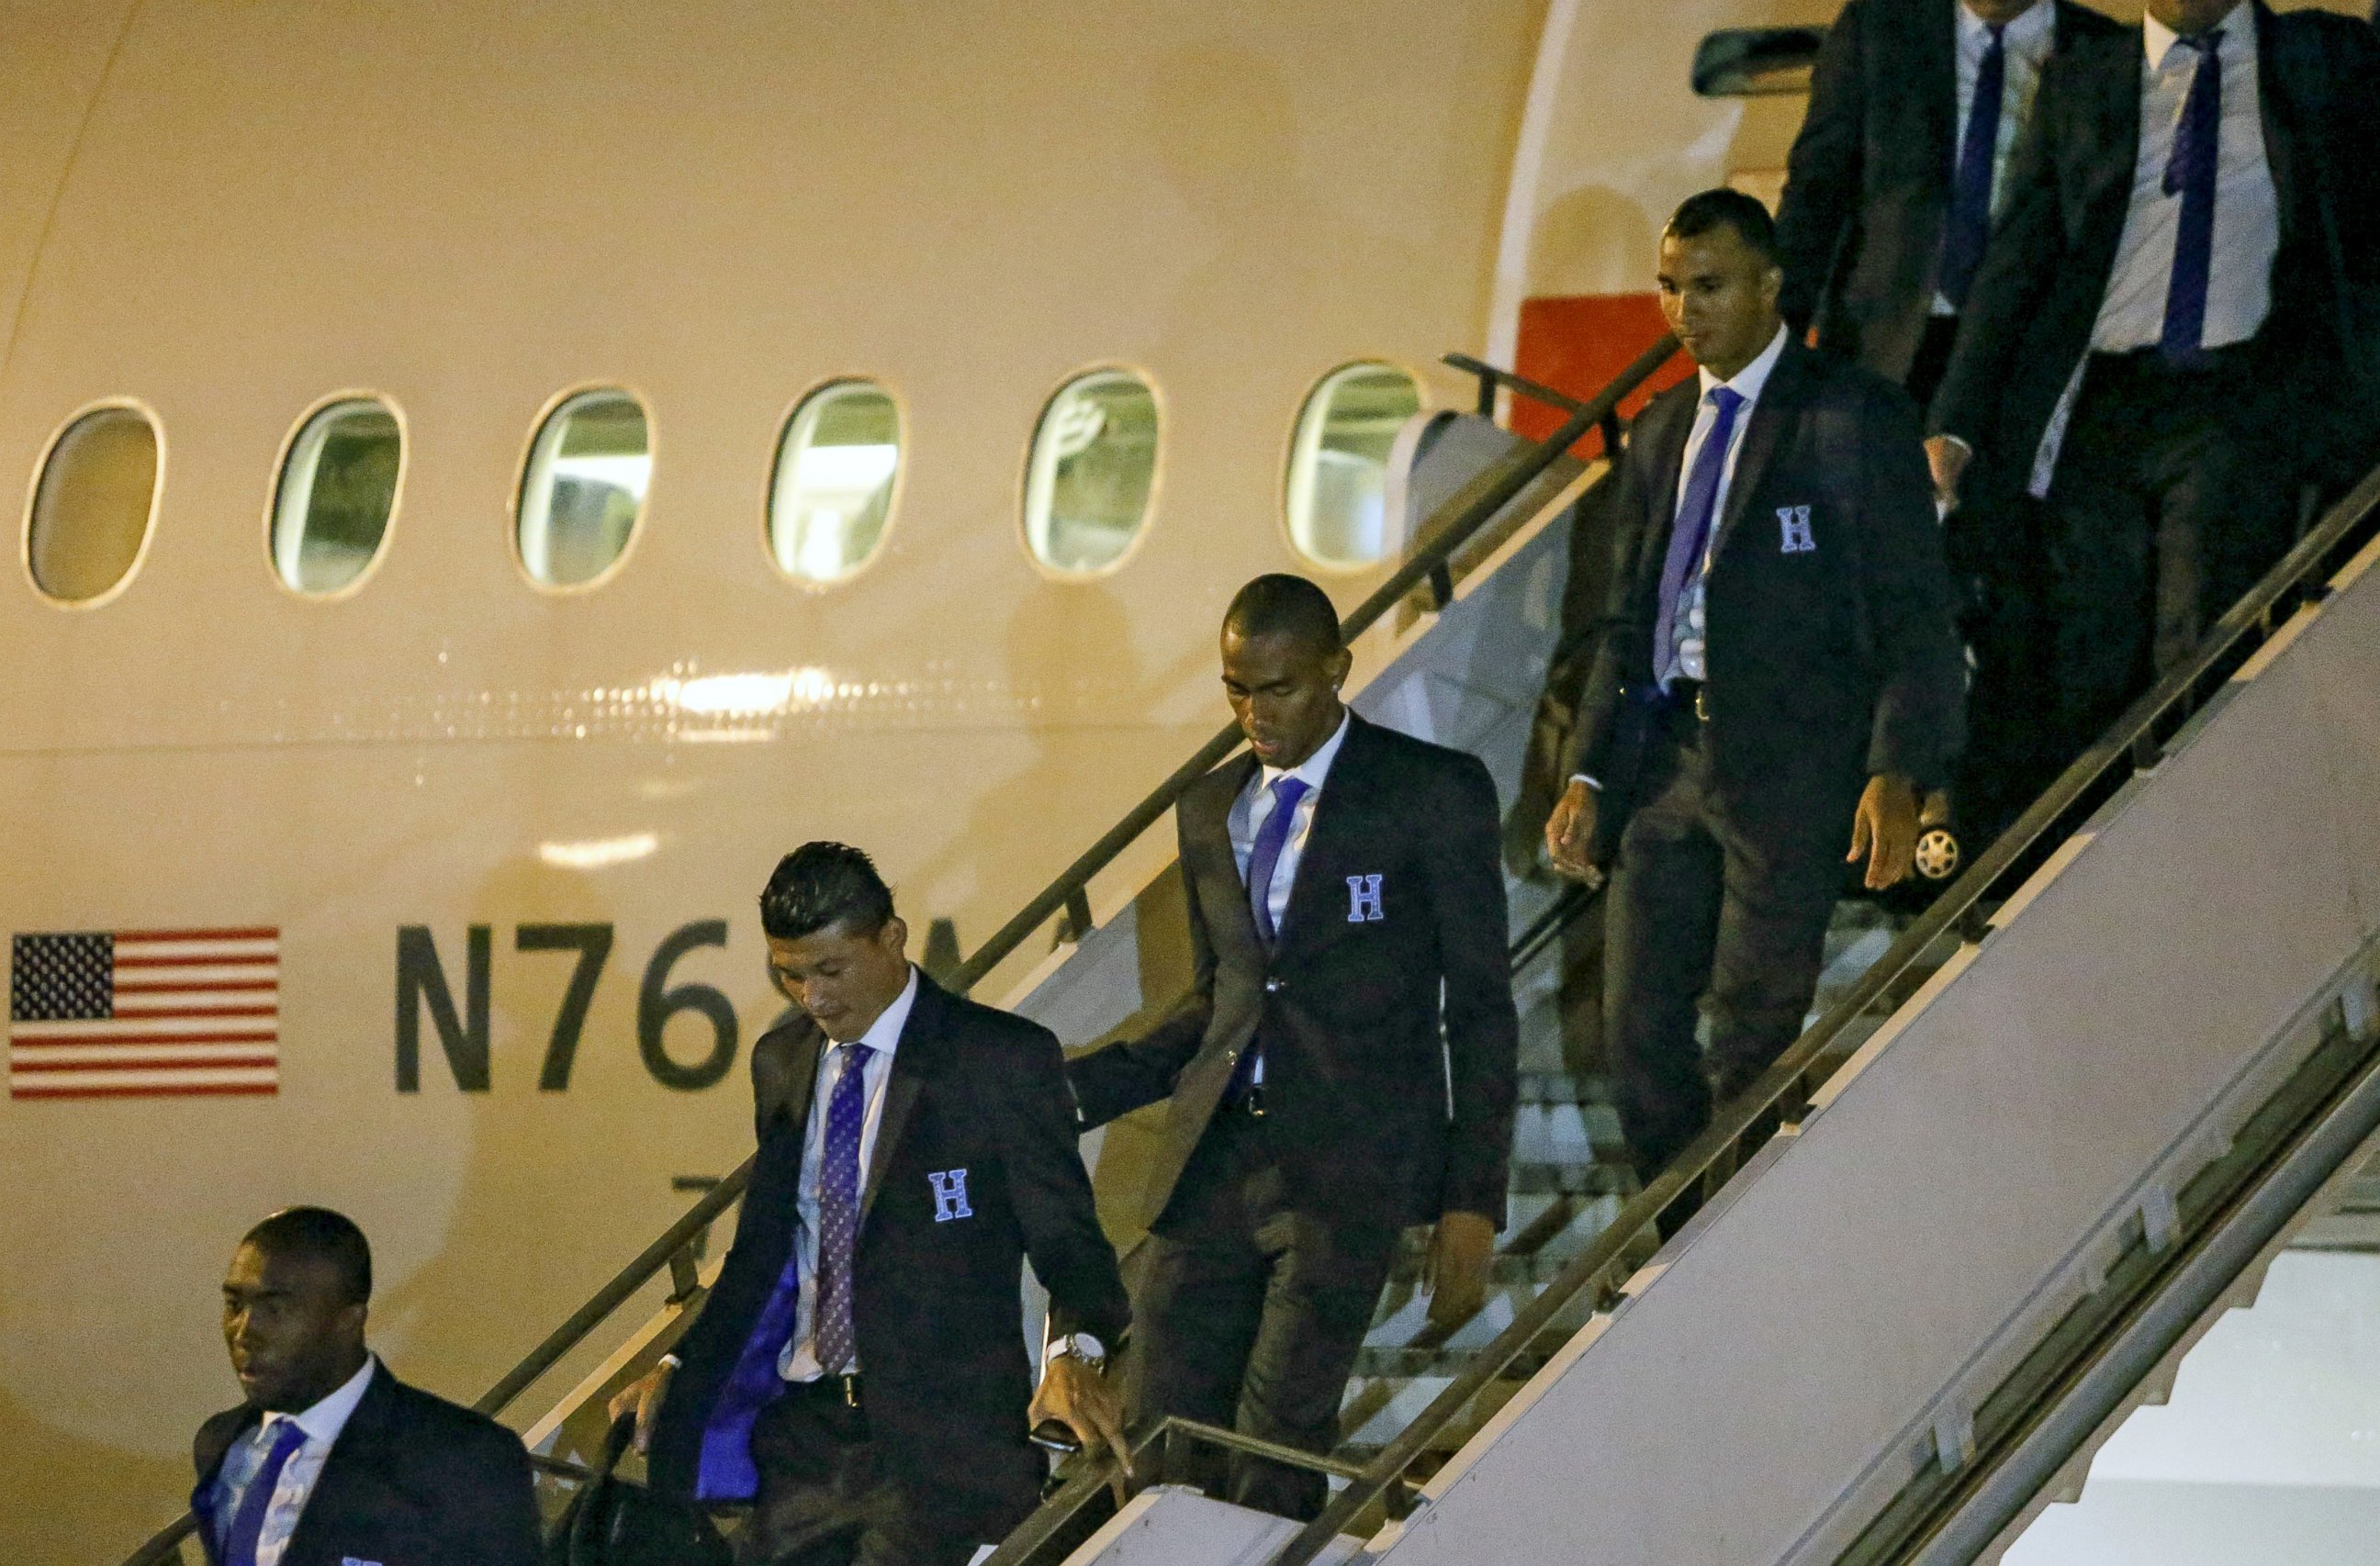 PHOTO: The Honduran national football team arrives at Guarulhos International Airport in Sao Paulo, June 9, 2014, to take part in the FIFA World Cup Brazil 2014.